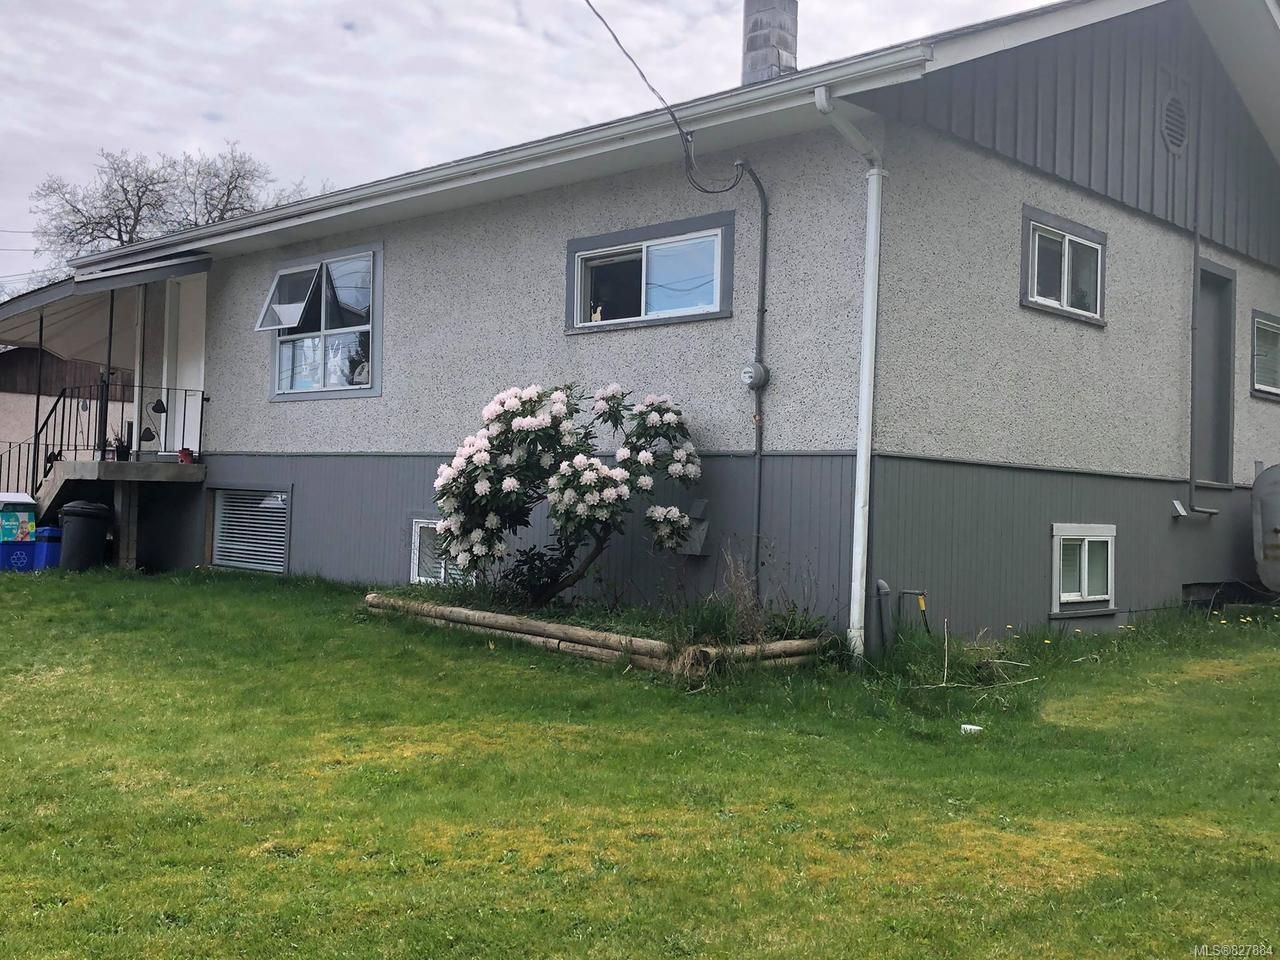 Main Photo: 2195 15th Ave in CAMPBELL RIVER: CR Campbell River West Multi Family for sale (Campbell River)  : MLS®# 827884